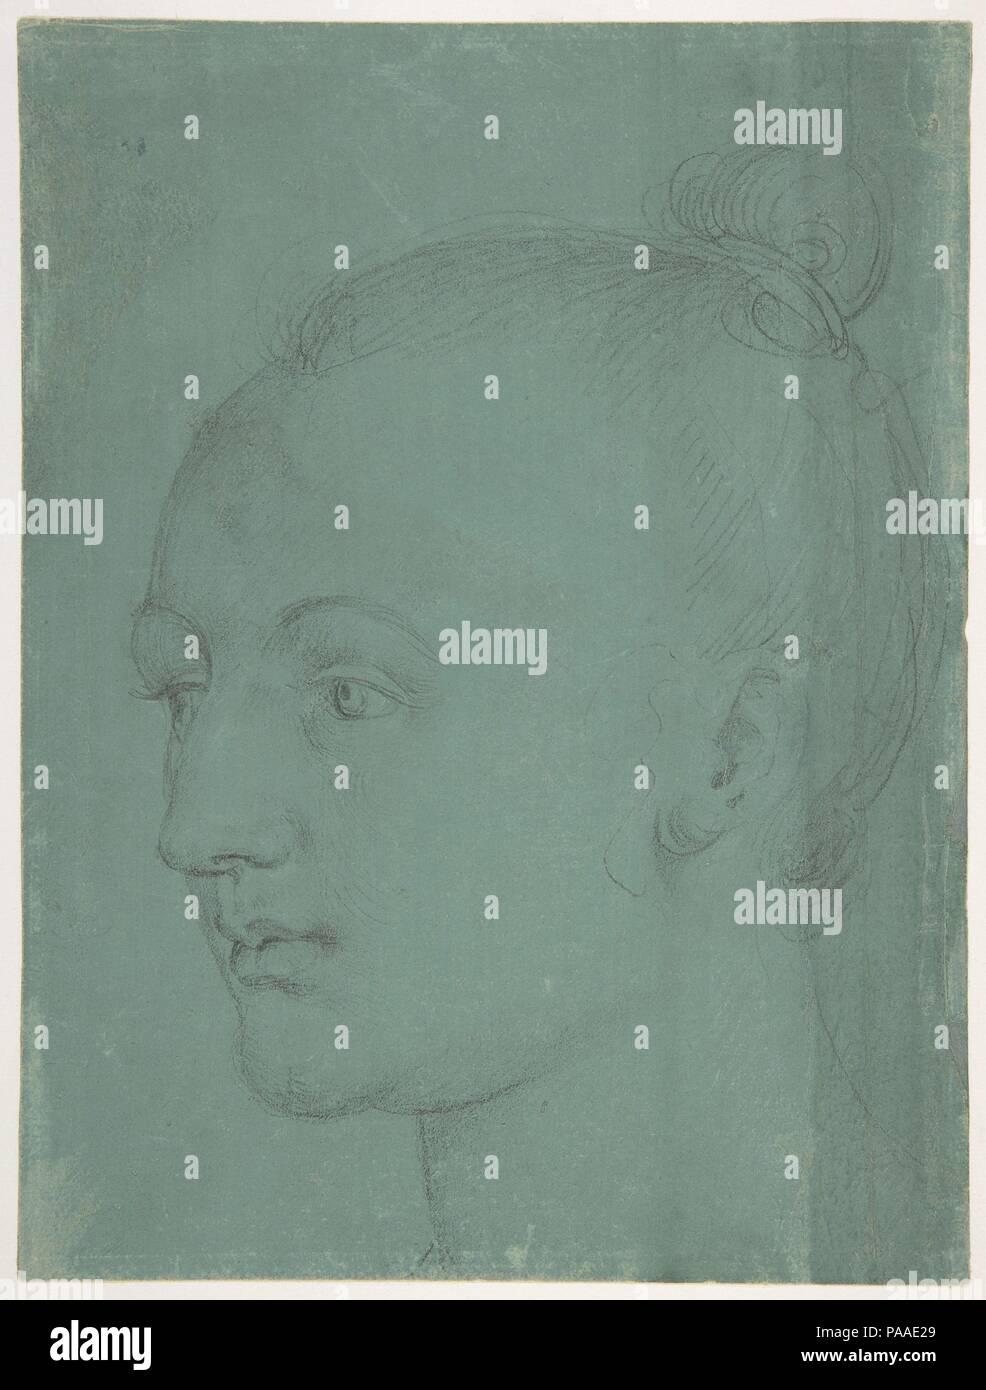 Head of a Young Woman. Artist: Albrecht Dürer (German, Nuremberg 1471-1528 Nuremberg). Dimensions: 7 7/8 x 5 15/16 in.  (20 x 15.1 cm). Date: 1522.  A supremely gifted and versatile German artist of the Renaissance period, Albrecht Dürer was a brilliant painter, draftsman, and printmaker. This head in three-quarter profile is probably one of a group of drawings made by Dürer in 1521-22 in preparation for a large 'sacra conversazione', a multifigured composition in a unified space with the Virgin and Child surrounded by saints. The present drawing may have been a study for the head of Saint Cat Stock Photo